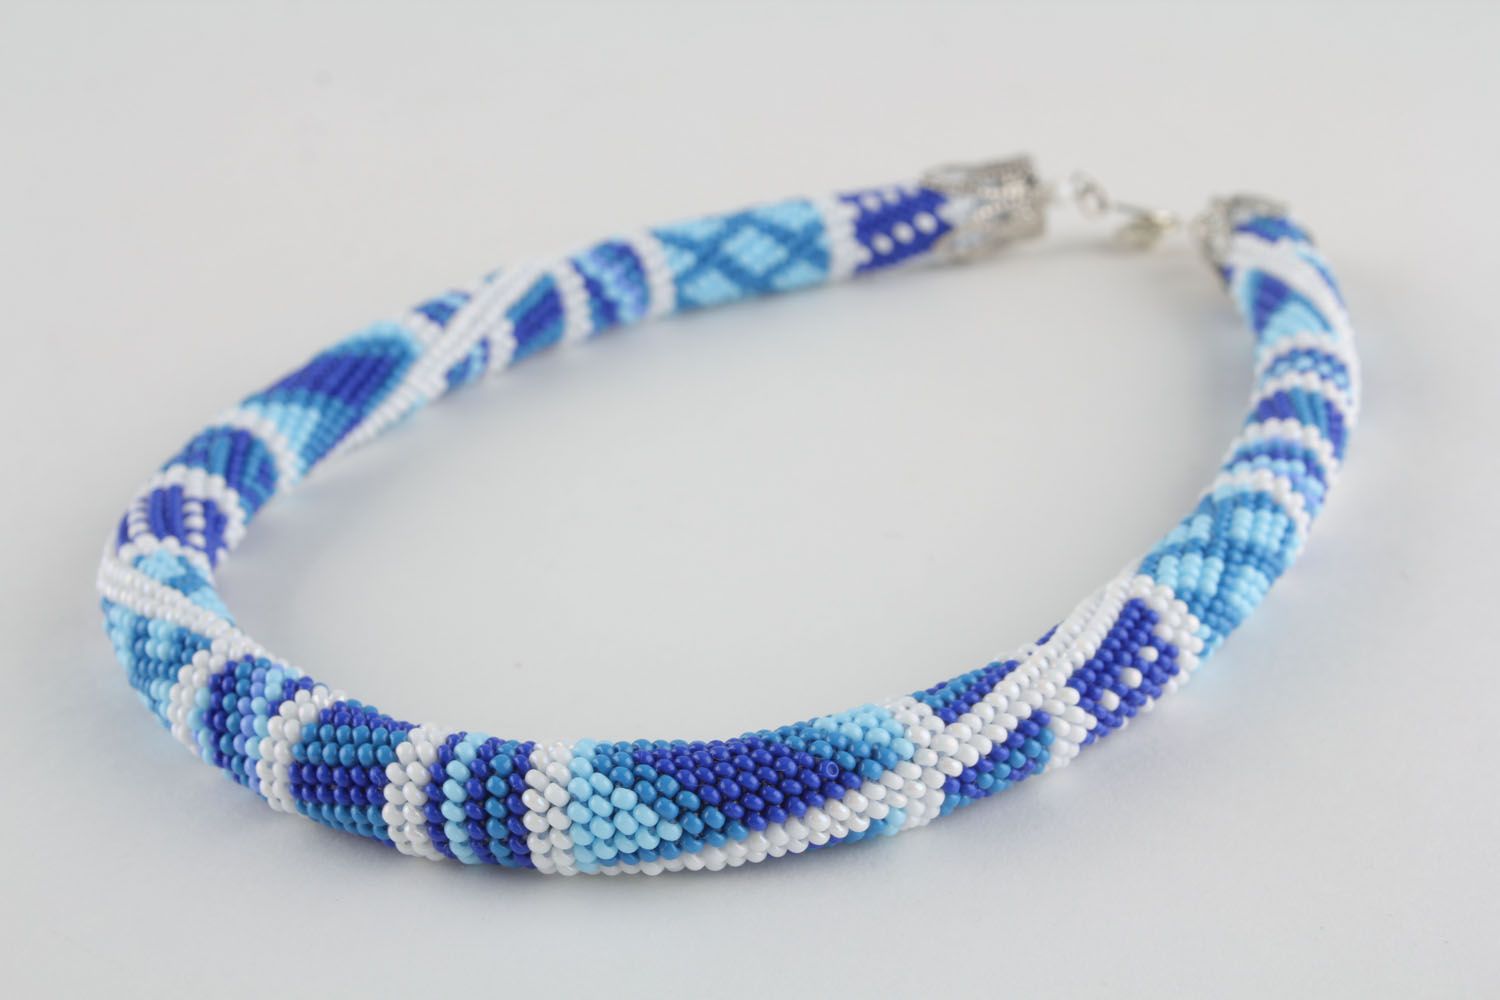 Woven cord necklace with geometric pattern photo 3